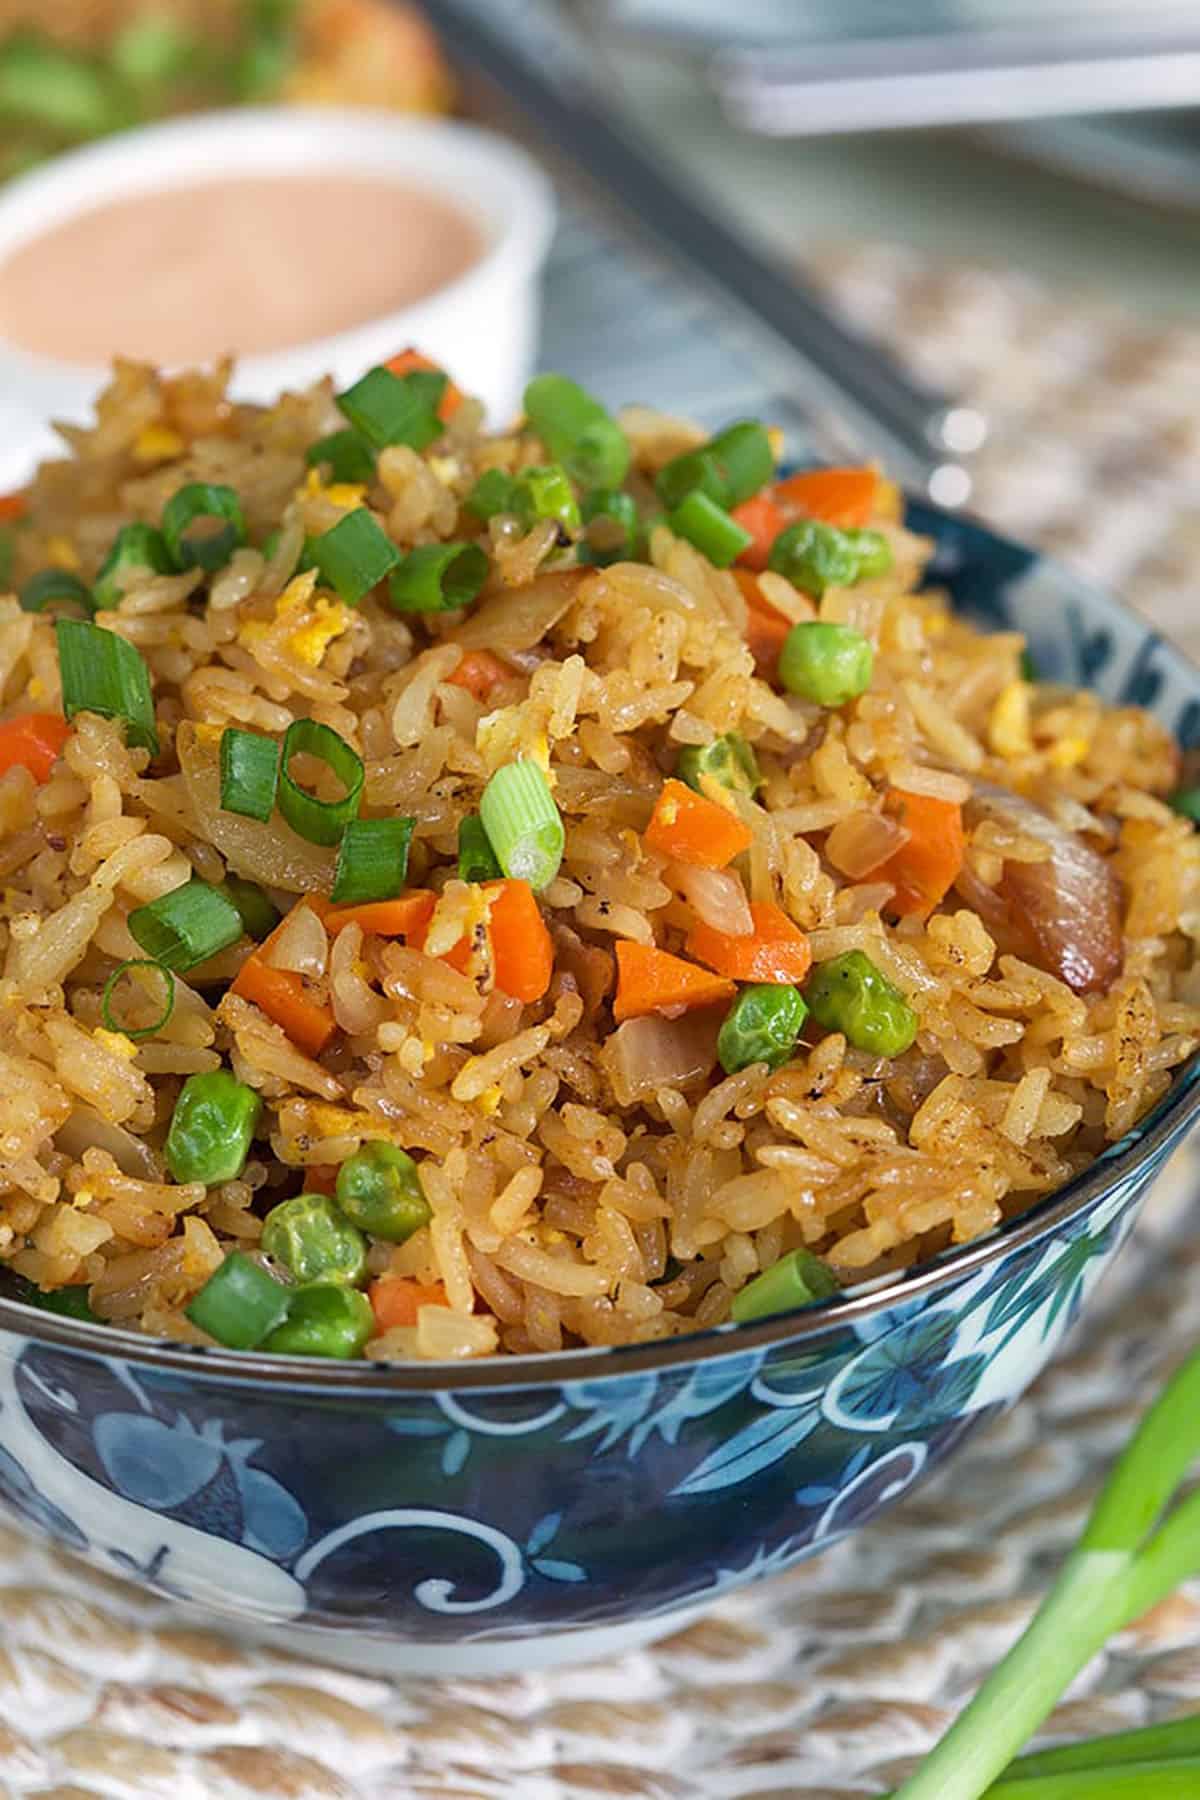 A close up image shows fried rice garnished with freshly chopped green onions.